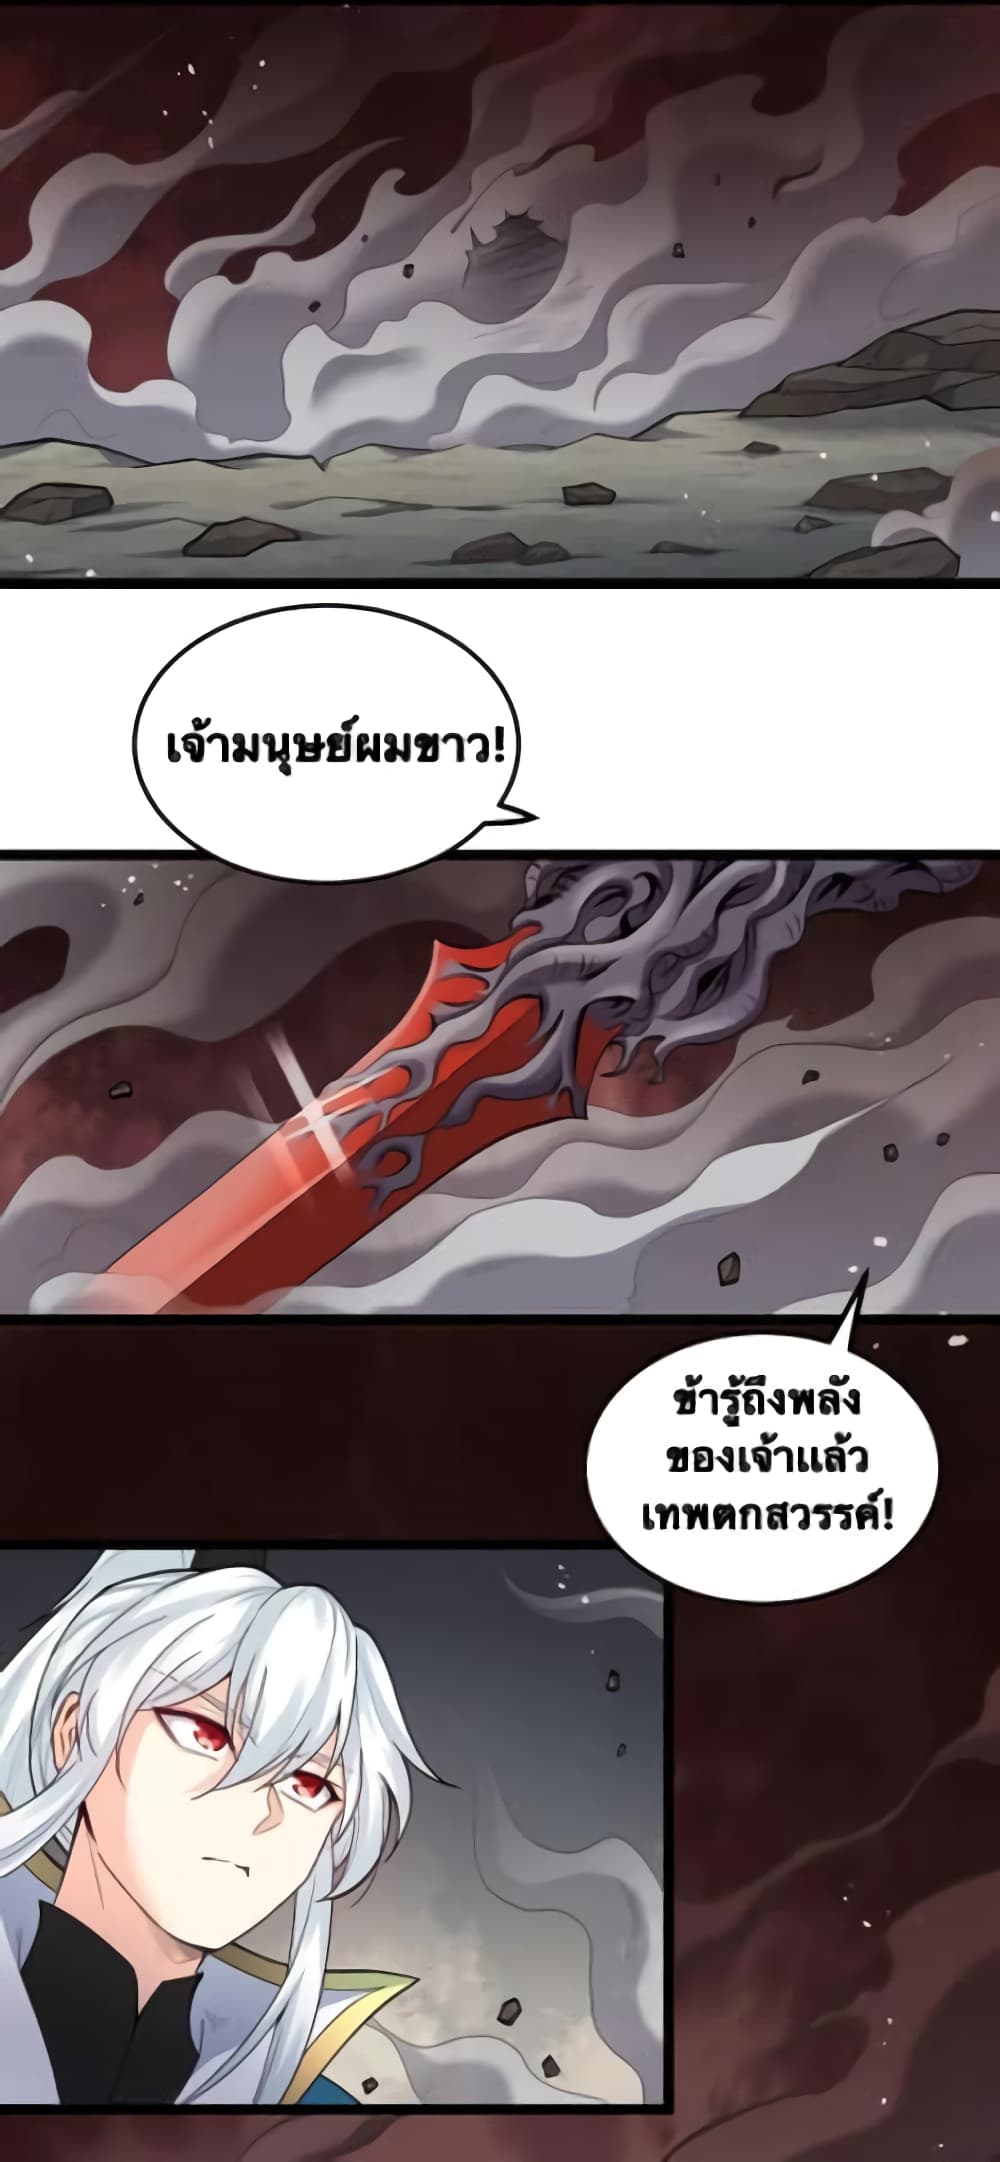 Godsian Masian from Another World ตอนที่ 89 (36)